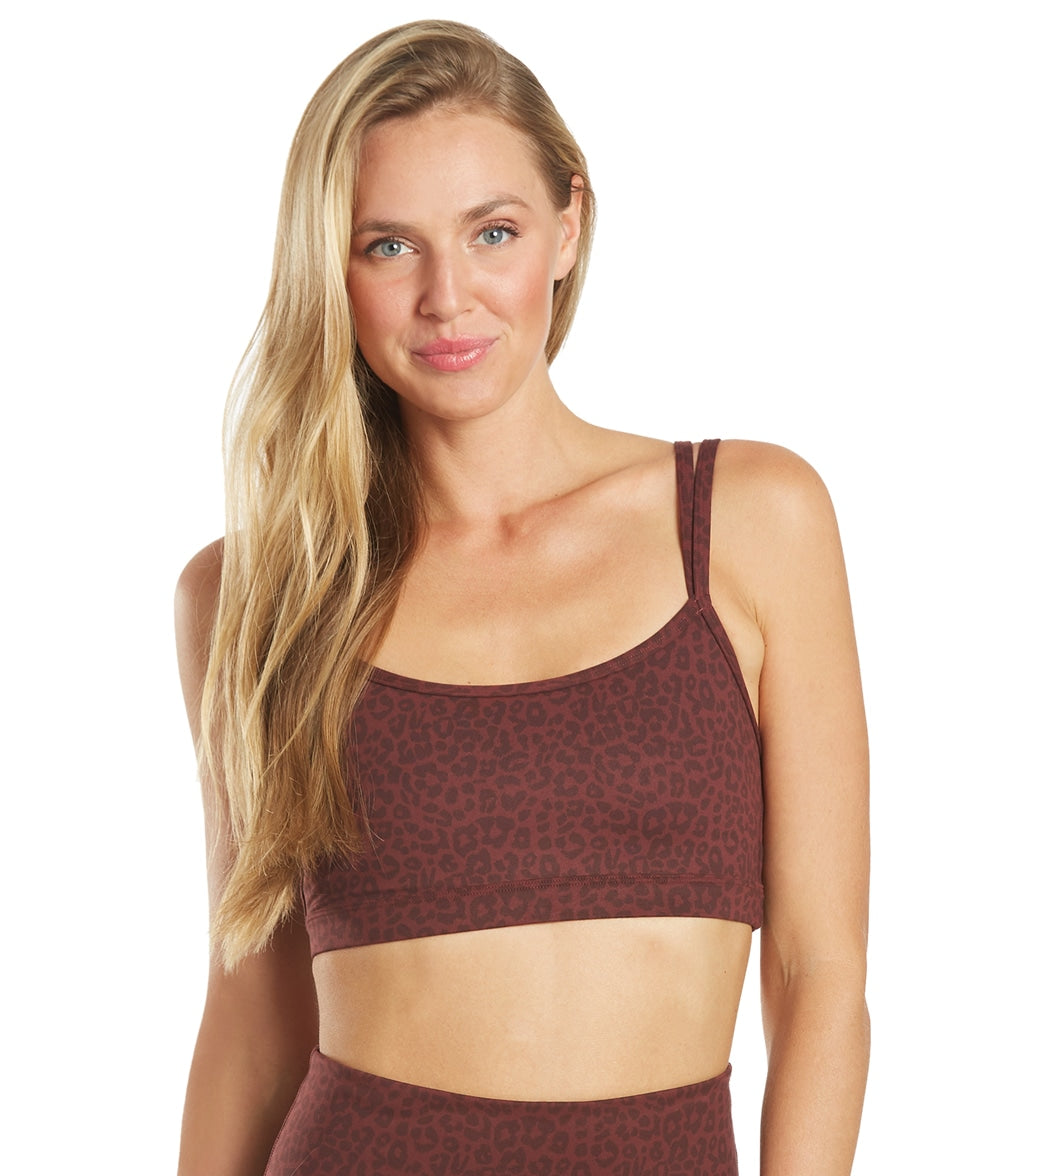 Everyday Yoga Wholesome Cheetah Sports Bra at YogaOutlet.com –